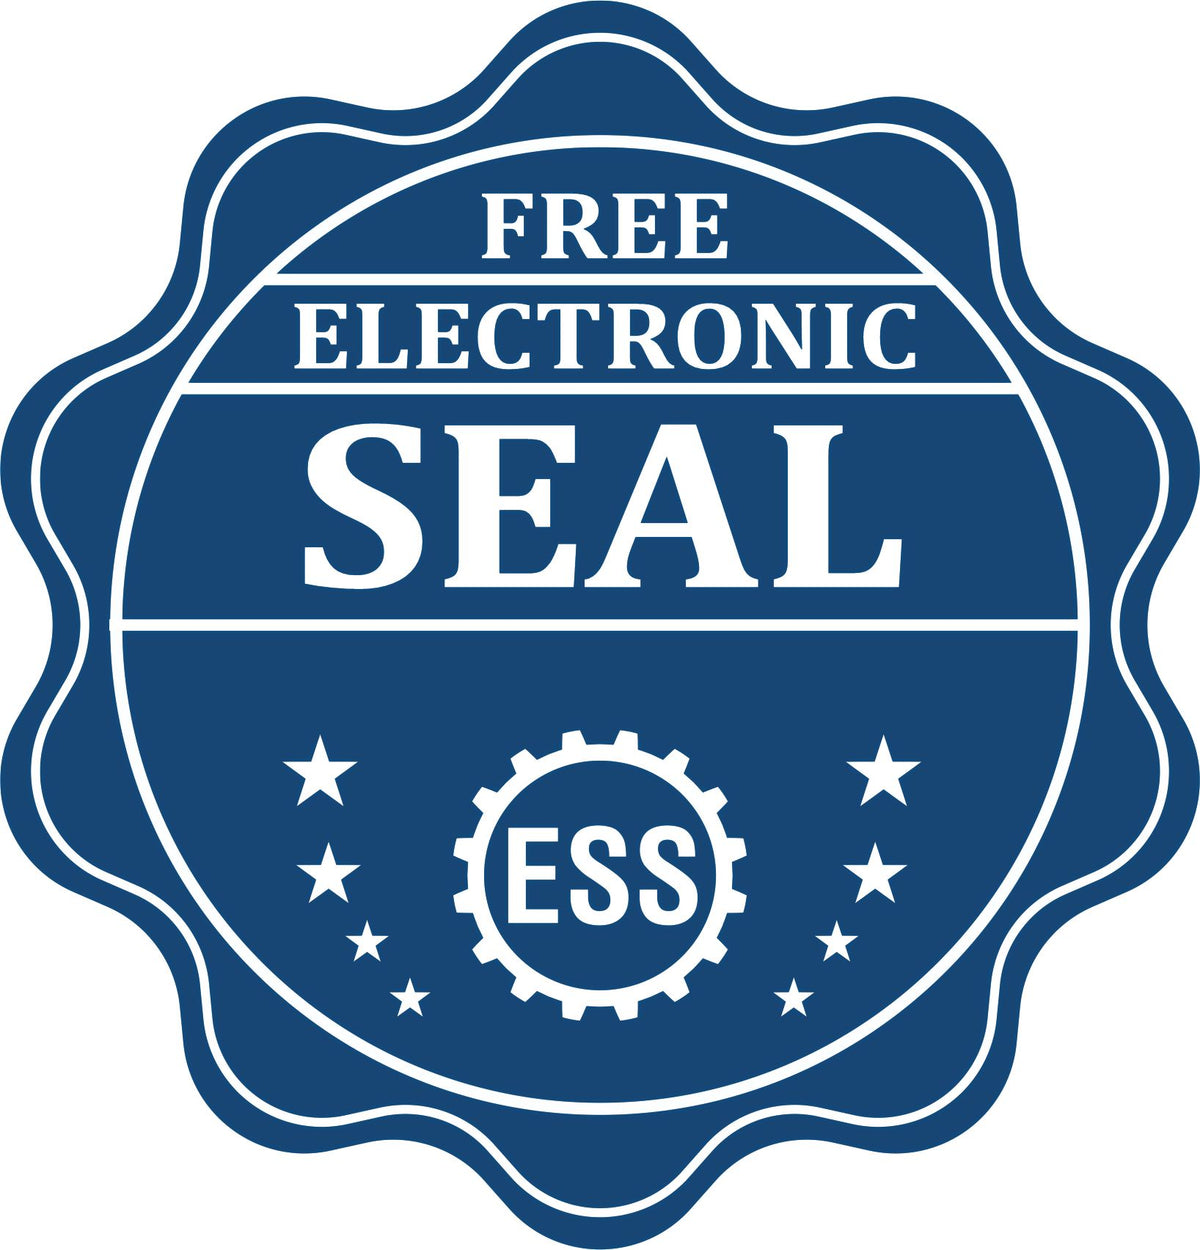 A badge showing a free electronic seal for the Hybrid Missouri Landscape Architect Seal with stars and the ESS gear on the emblem.